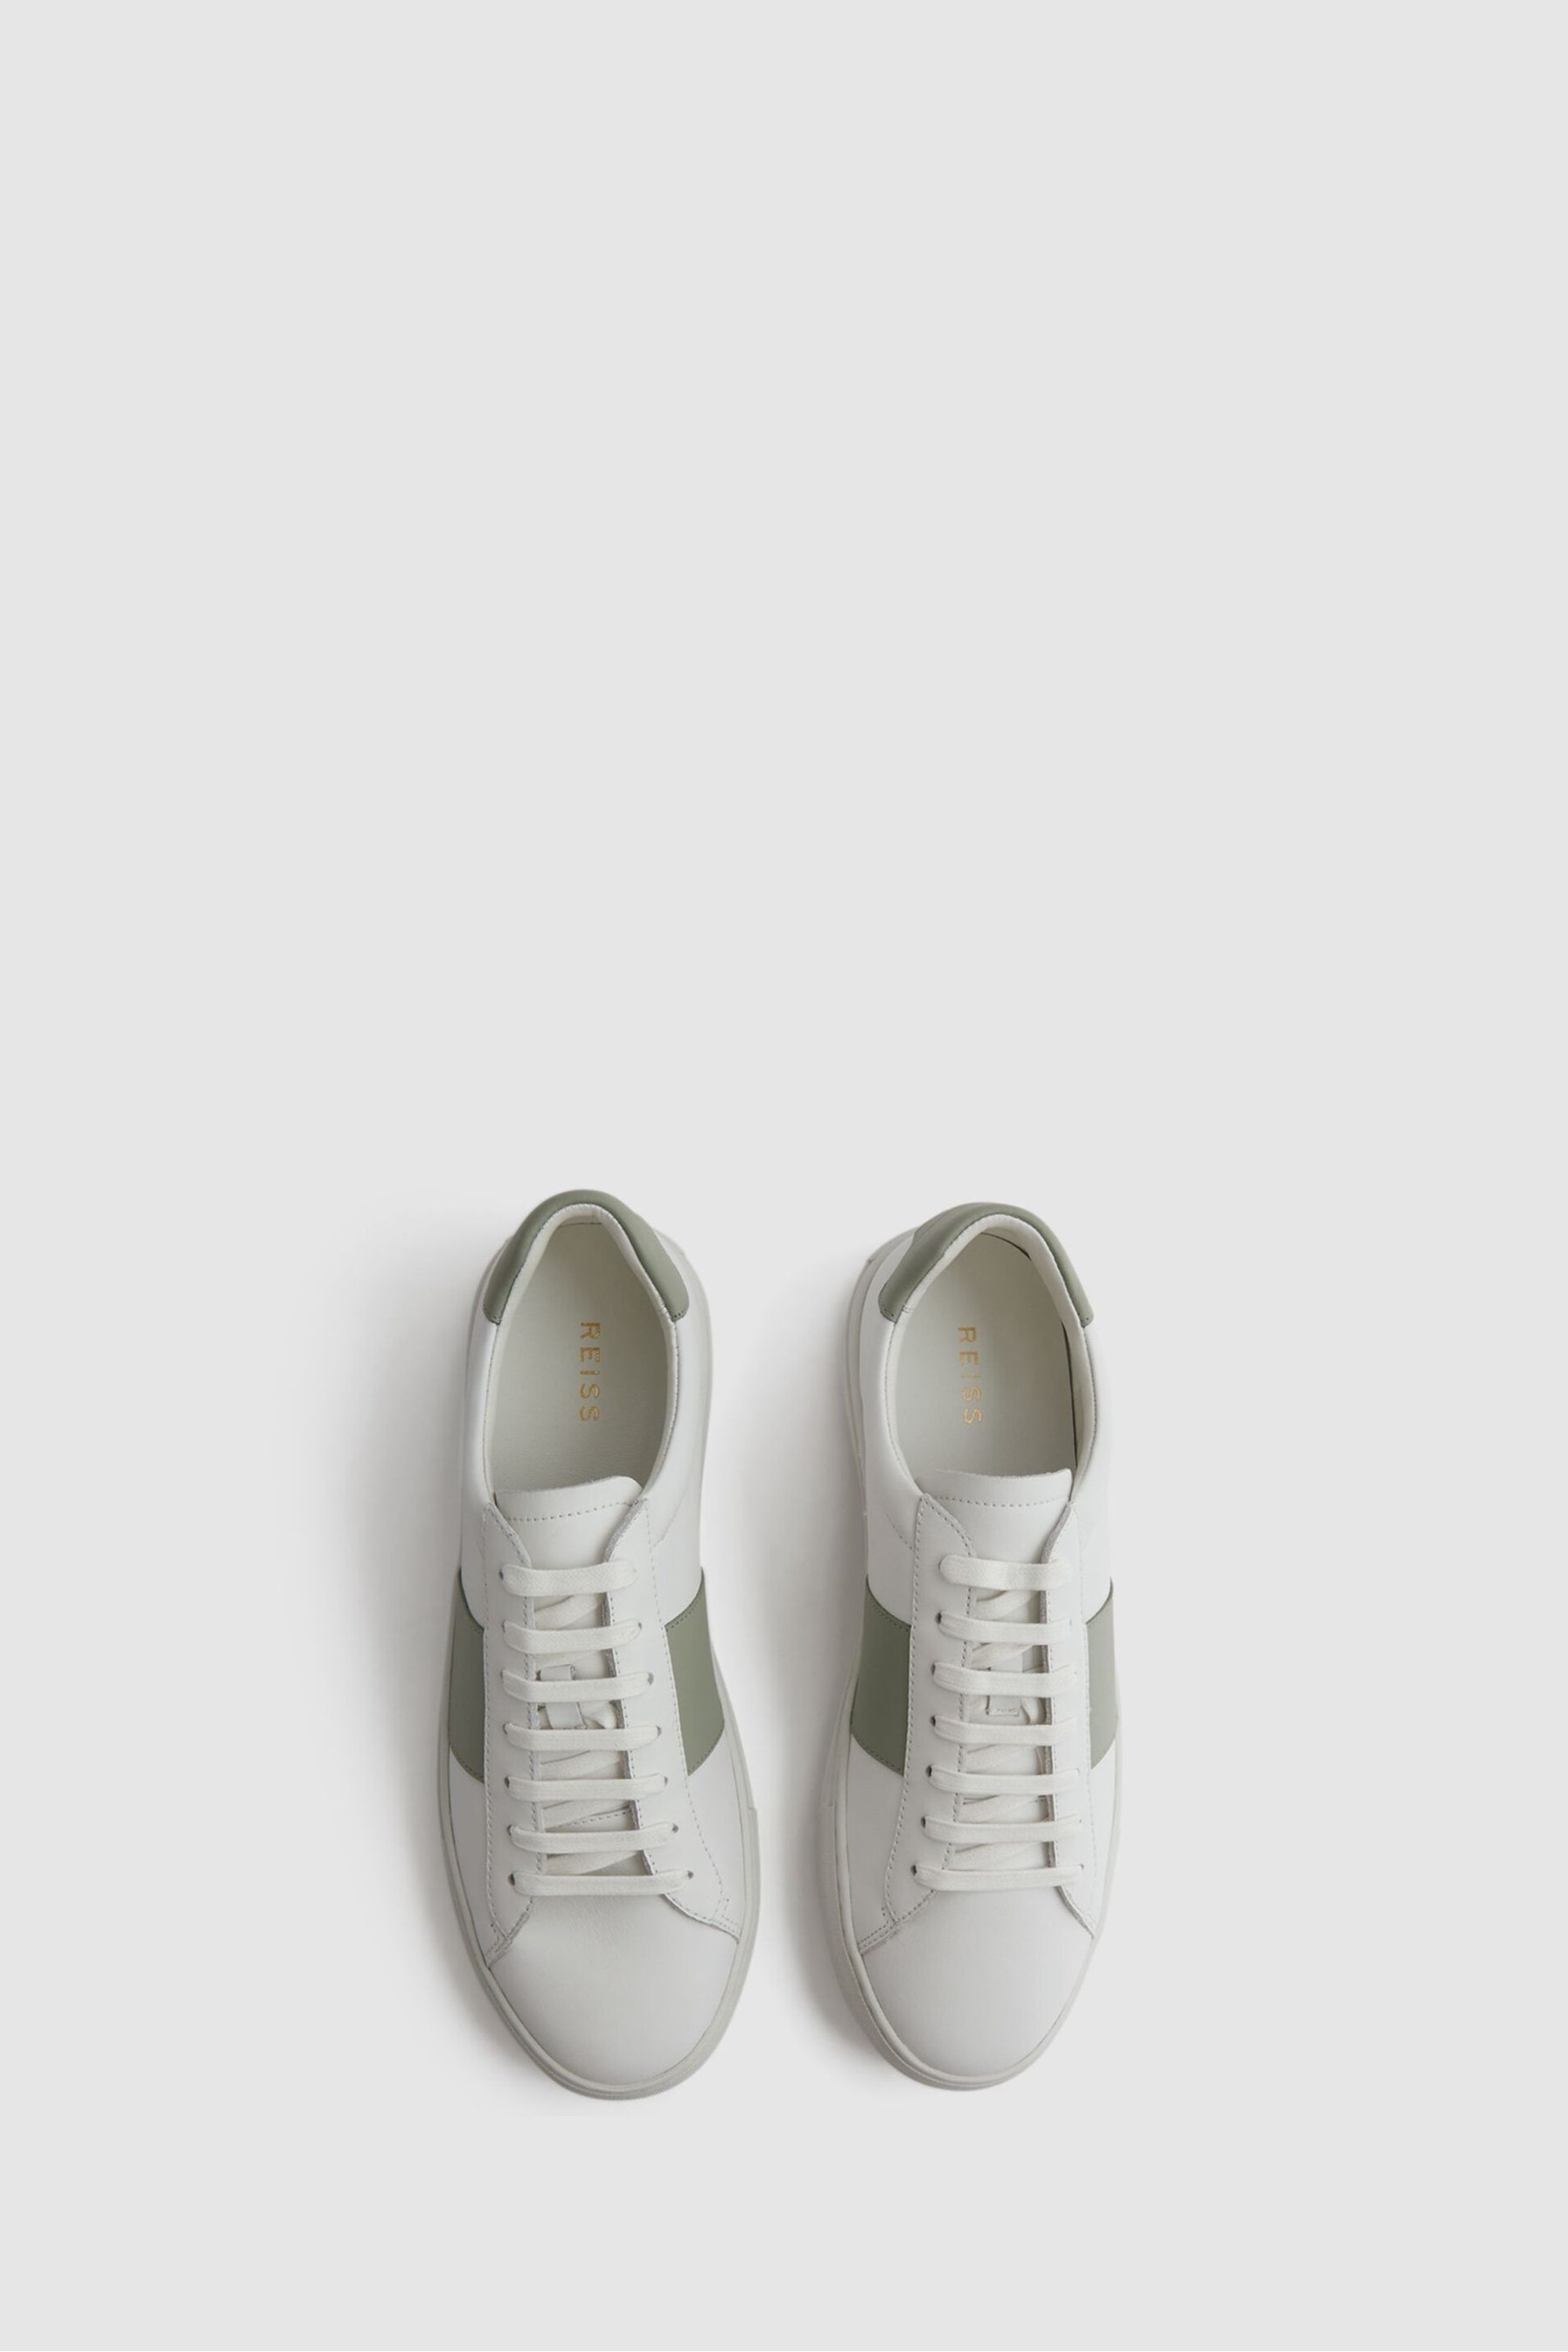 Reiss White/Sage Finley Stripe Leather Trainers - Image 3 of 4